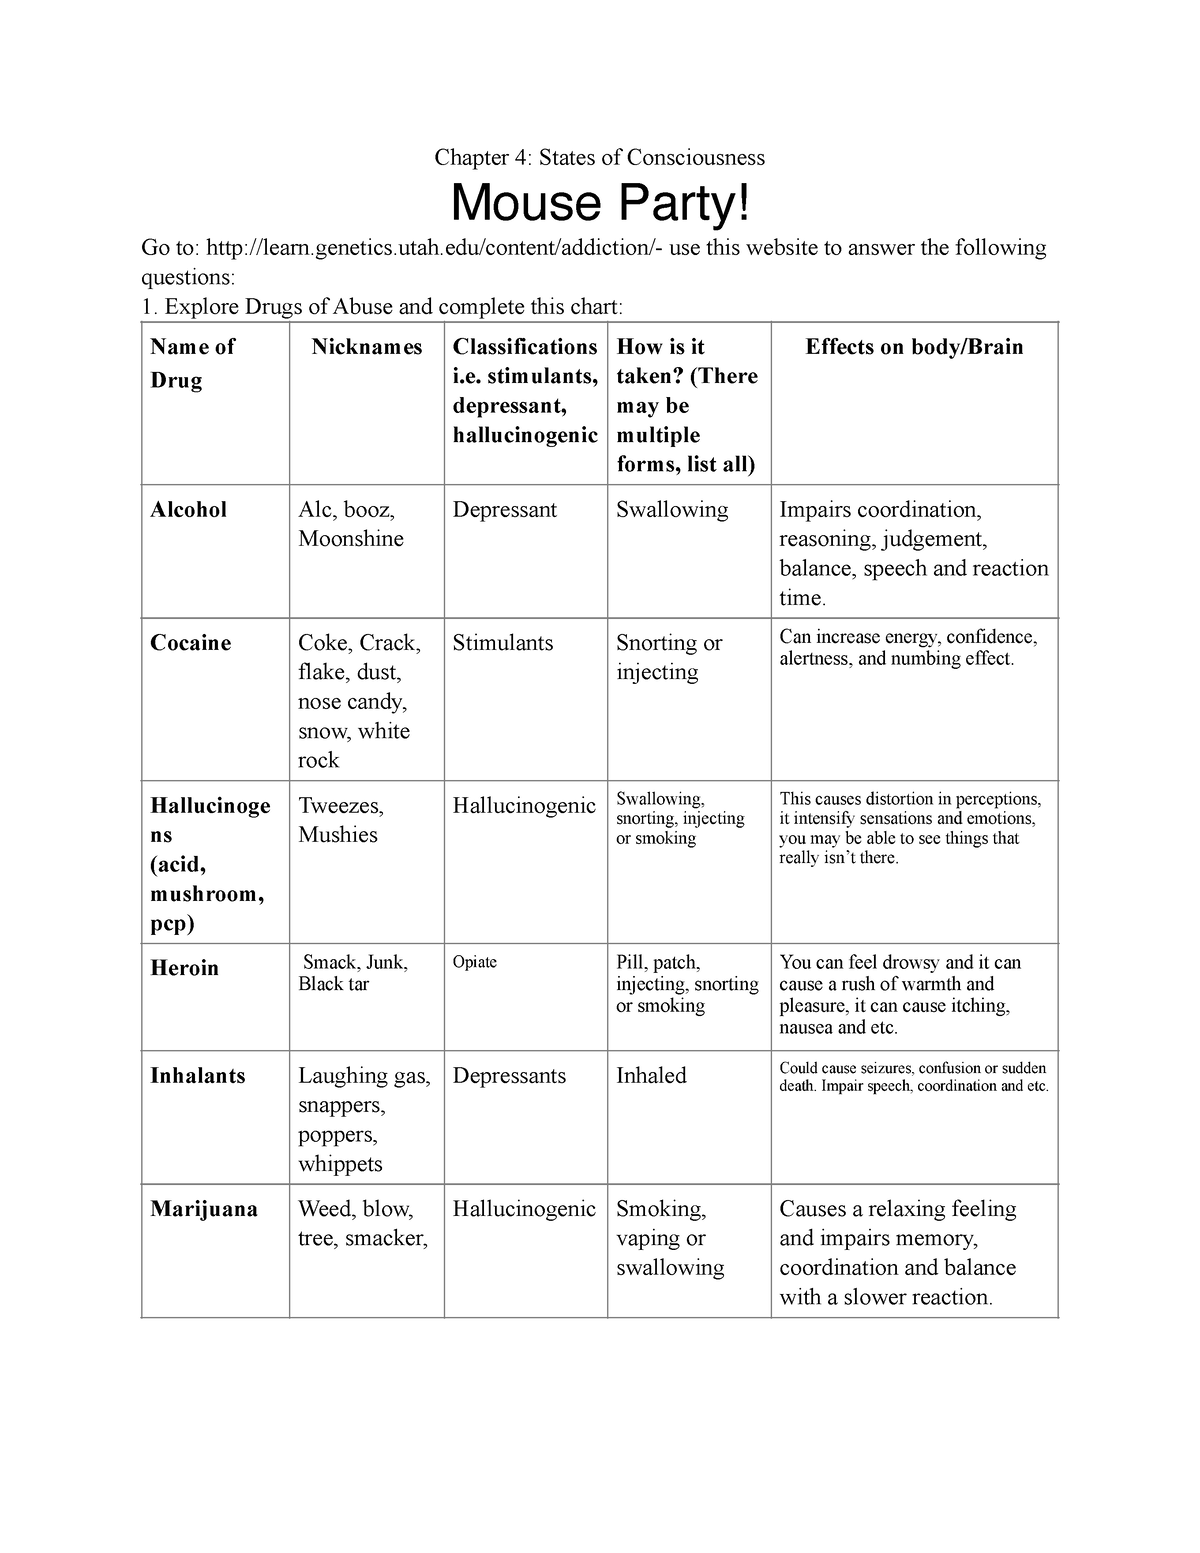 general-psychology-mouse-party-copy-chapter-4-states-of